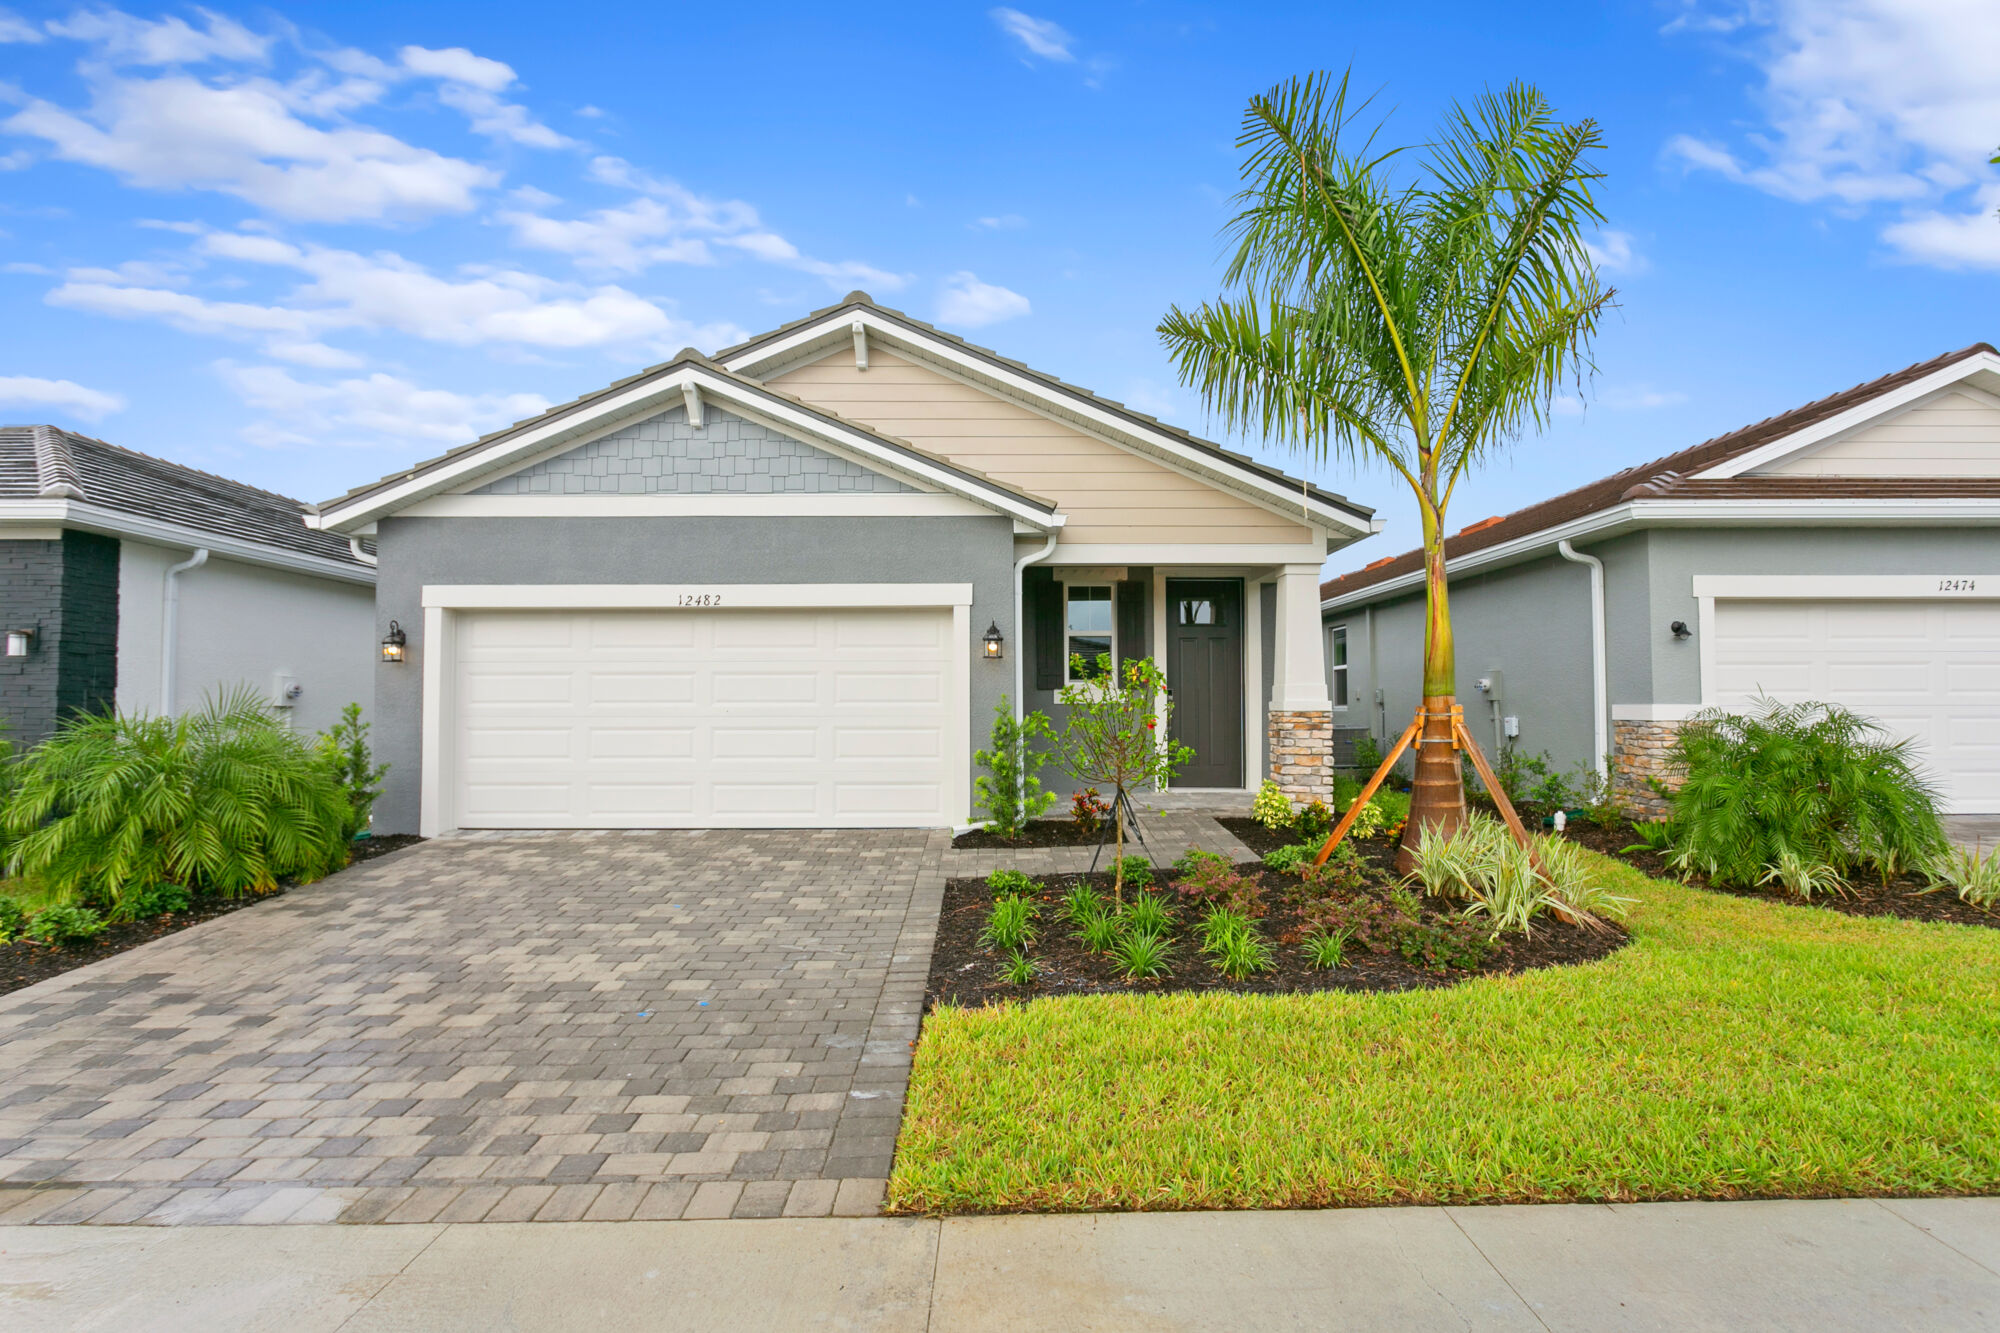 3 bedroom, 2 bath, 2 car garage, paver drive, walkway and lanai, single-family home, quartz countertops, plank tile floors, 42" upper cabinets, open floor plan, level yard, landscaped, palm trees, sod, irrigation 